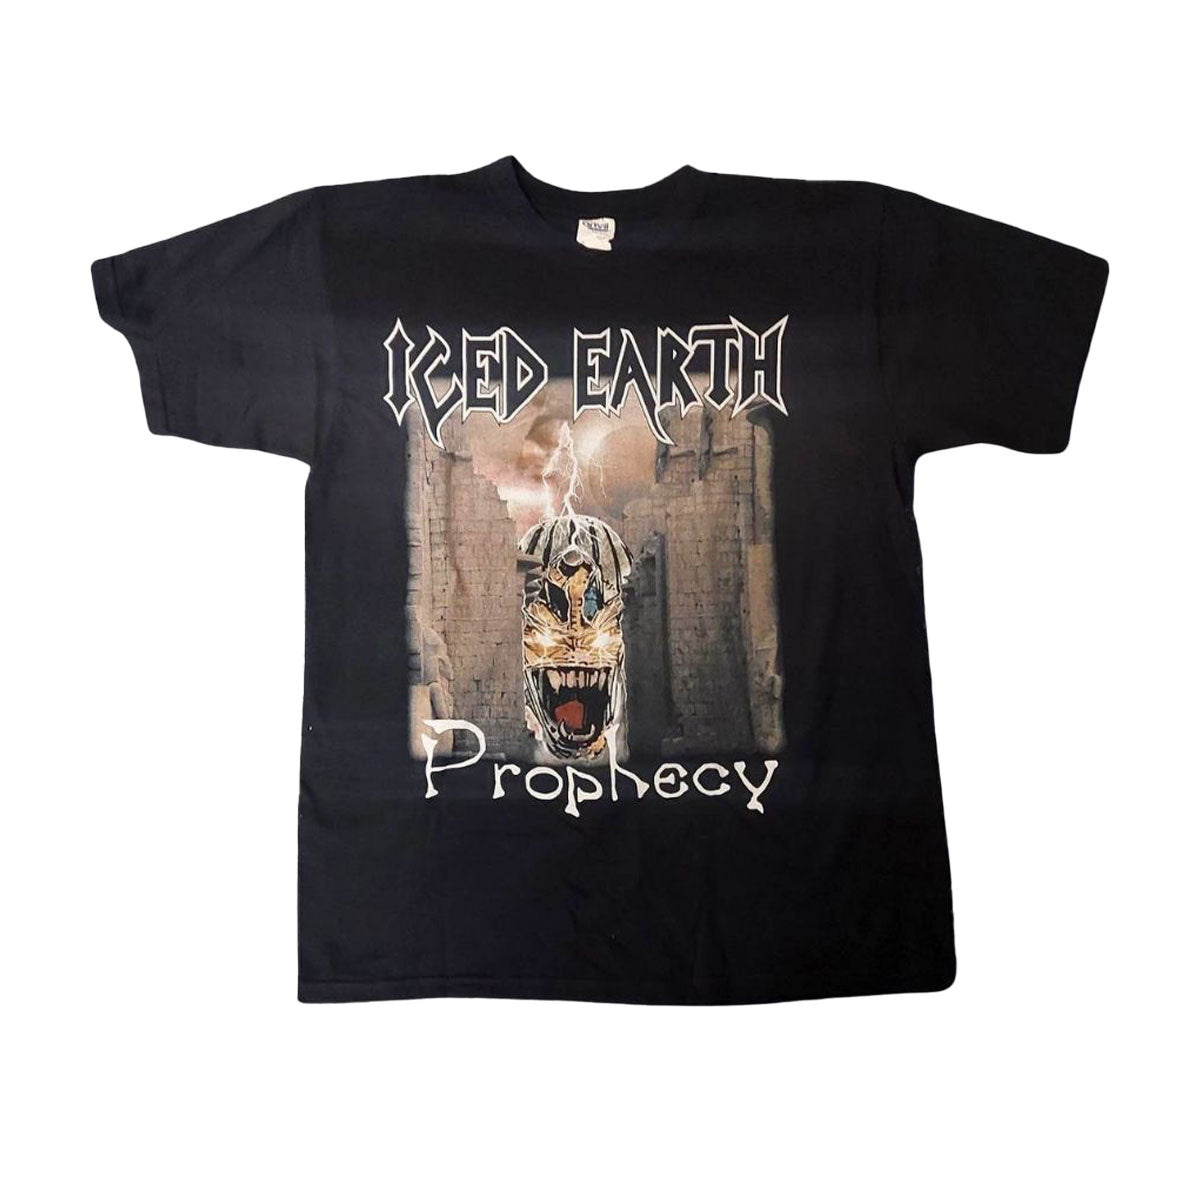 ICED EARTH Prophecy T-Shirt